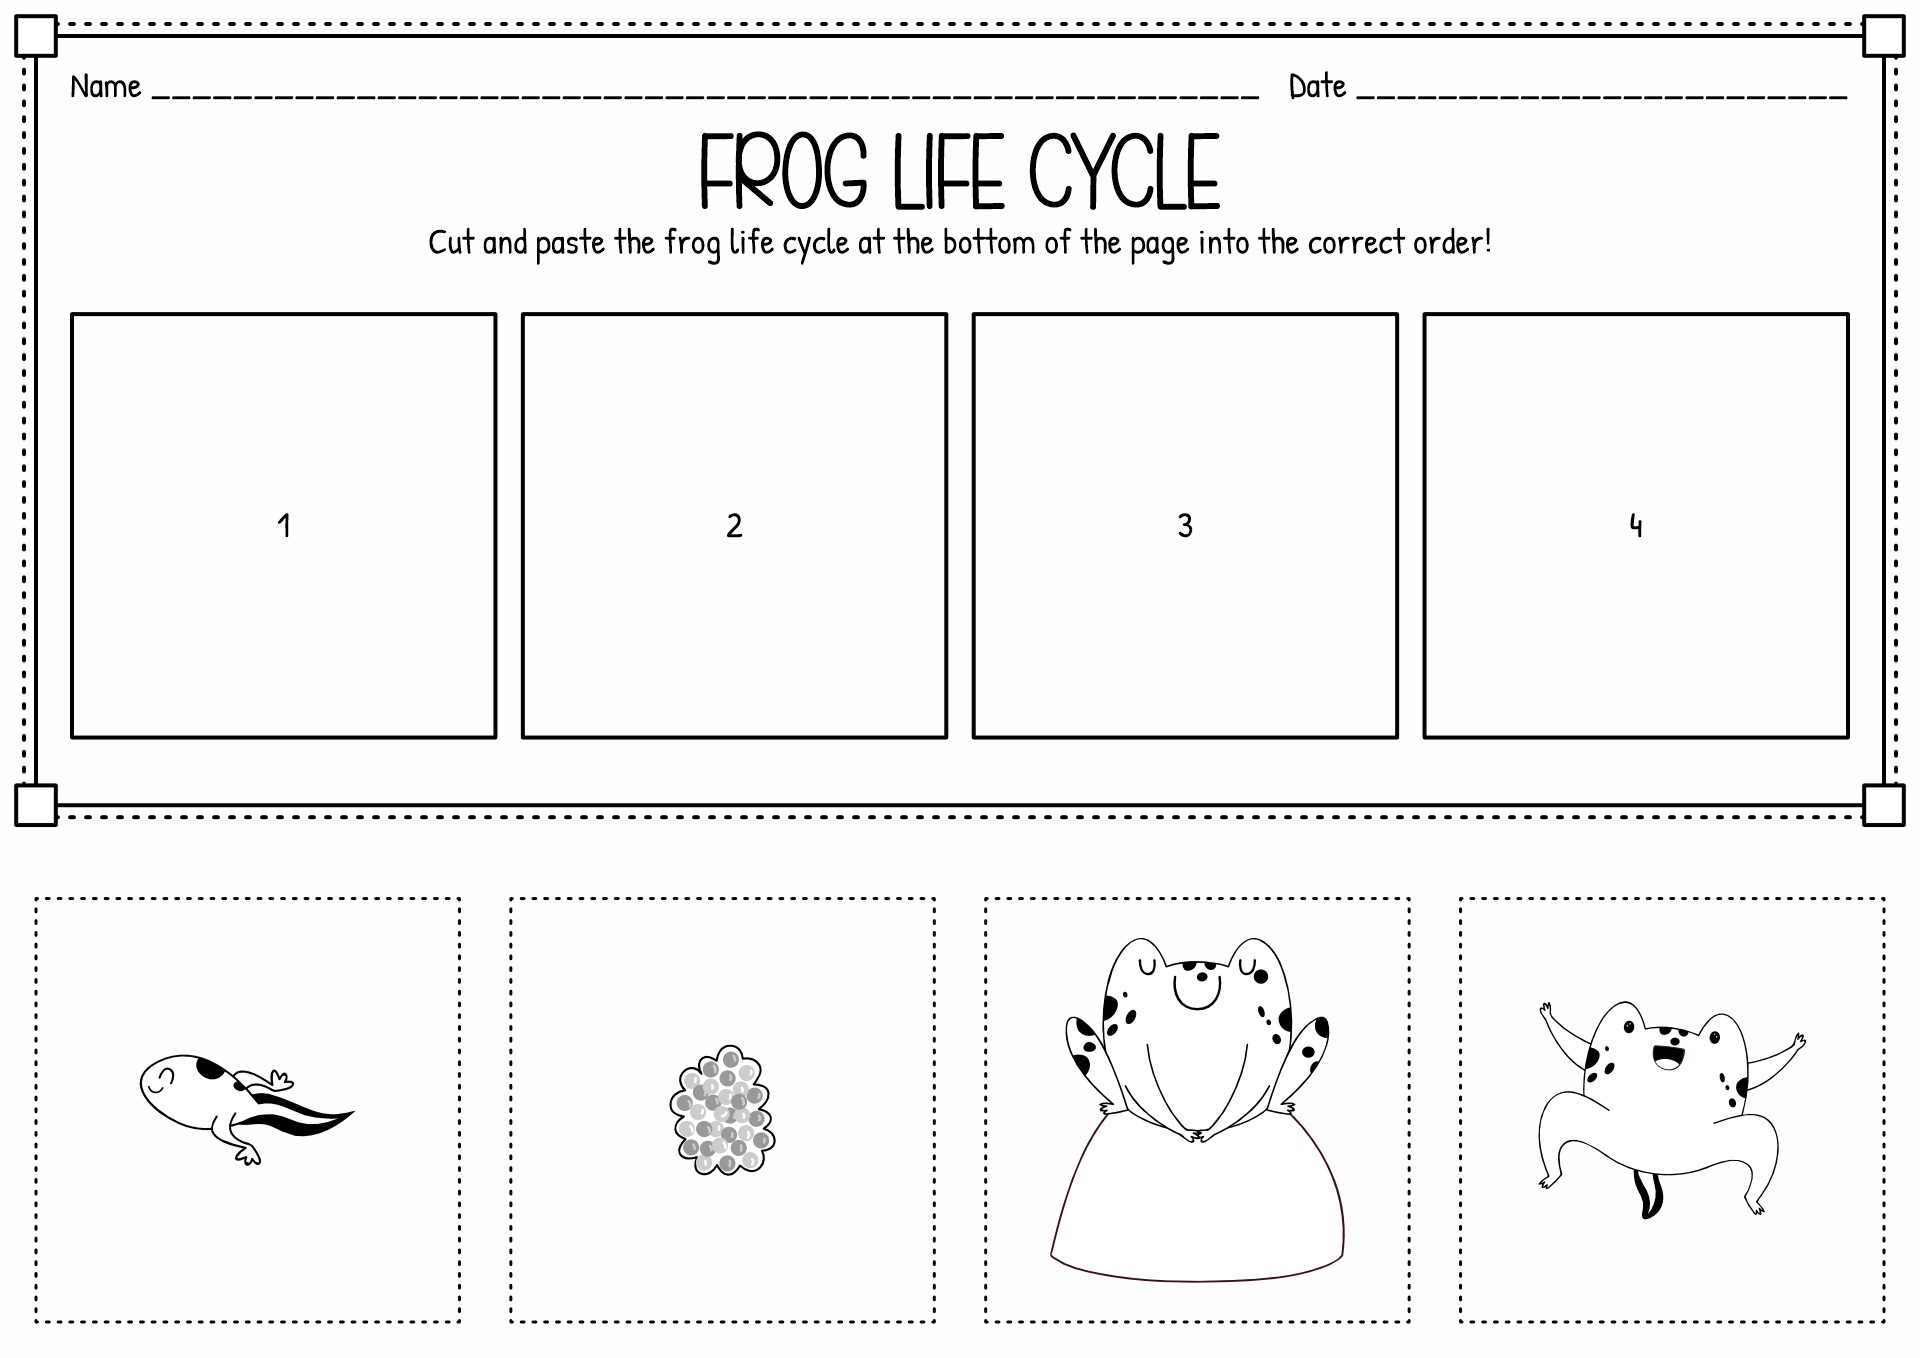 Frog Life Cycle Cut and Paste